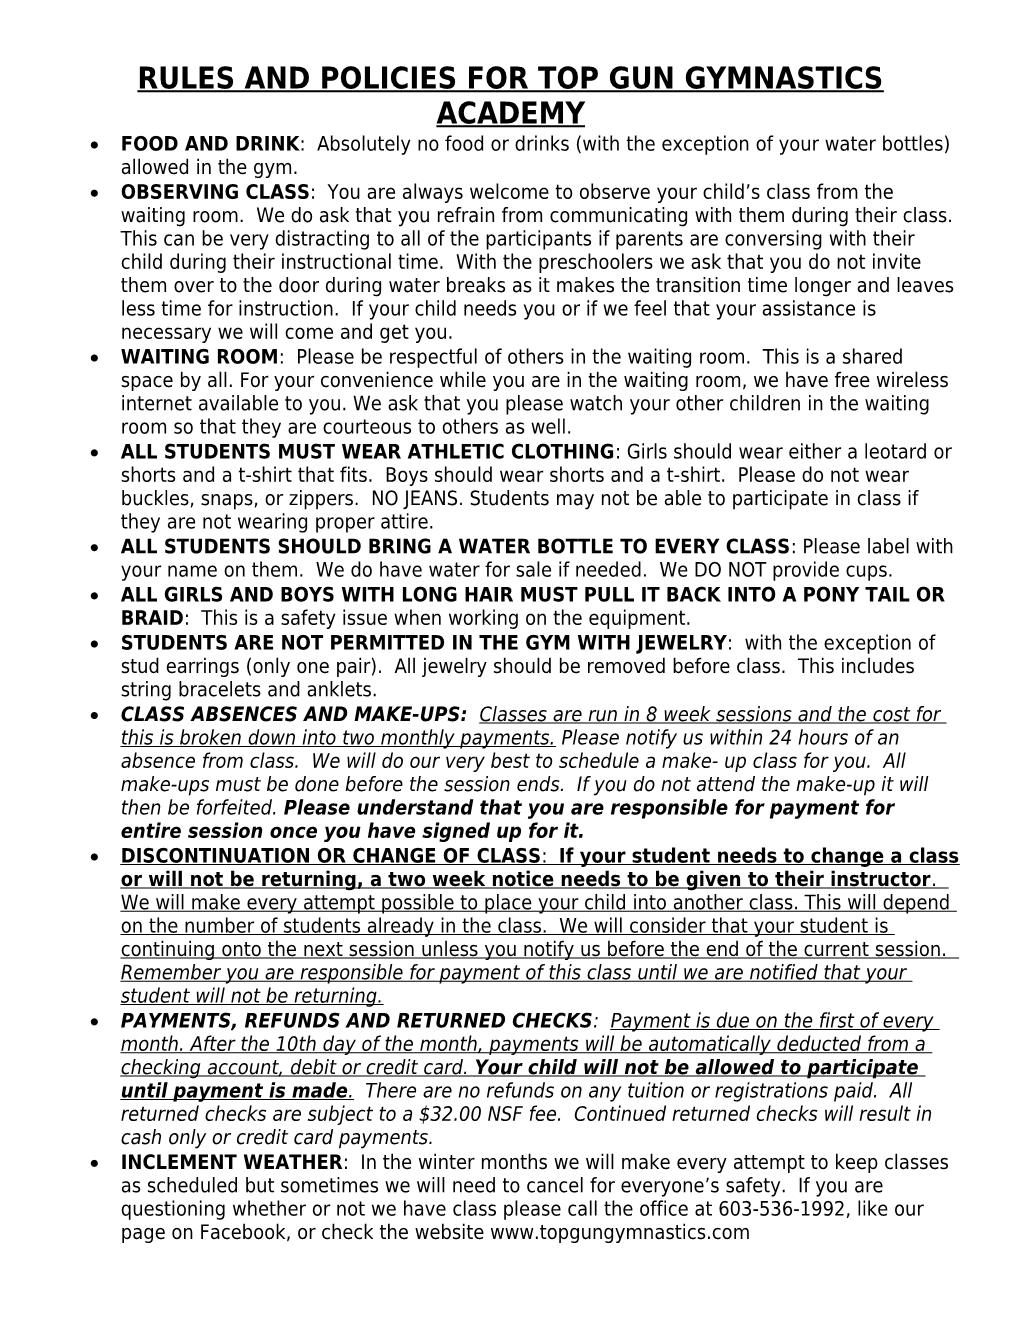 Rules and Policies for Top Gun Gymnastics Academy